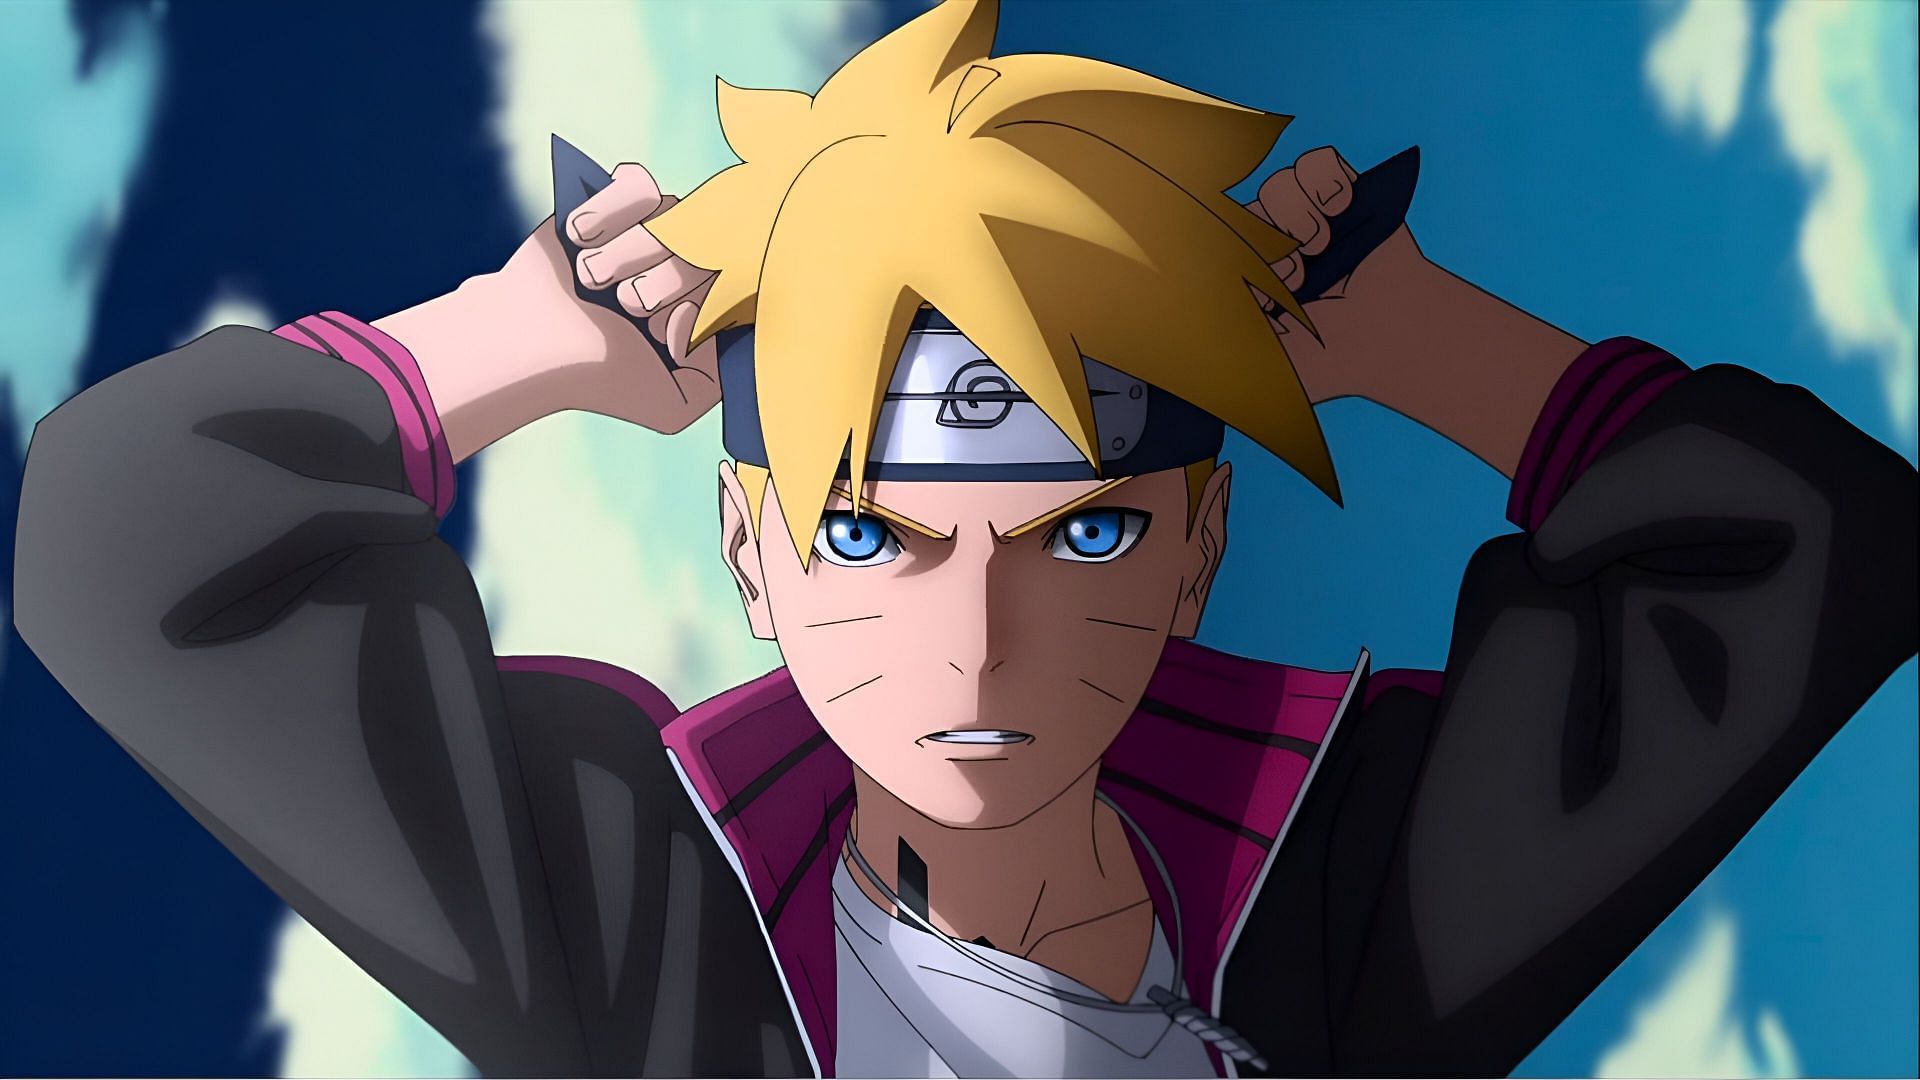 The protagonist as seen in the anime (Image via Studio Pierrot)